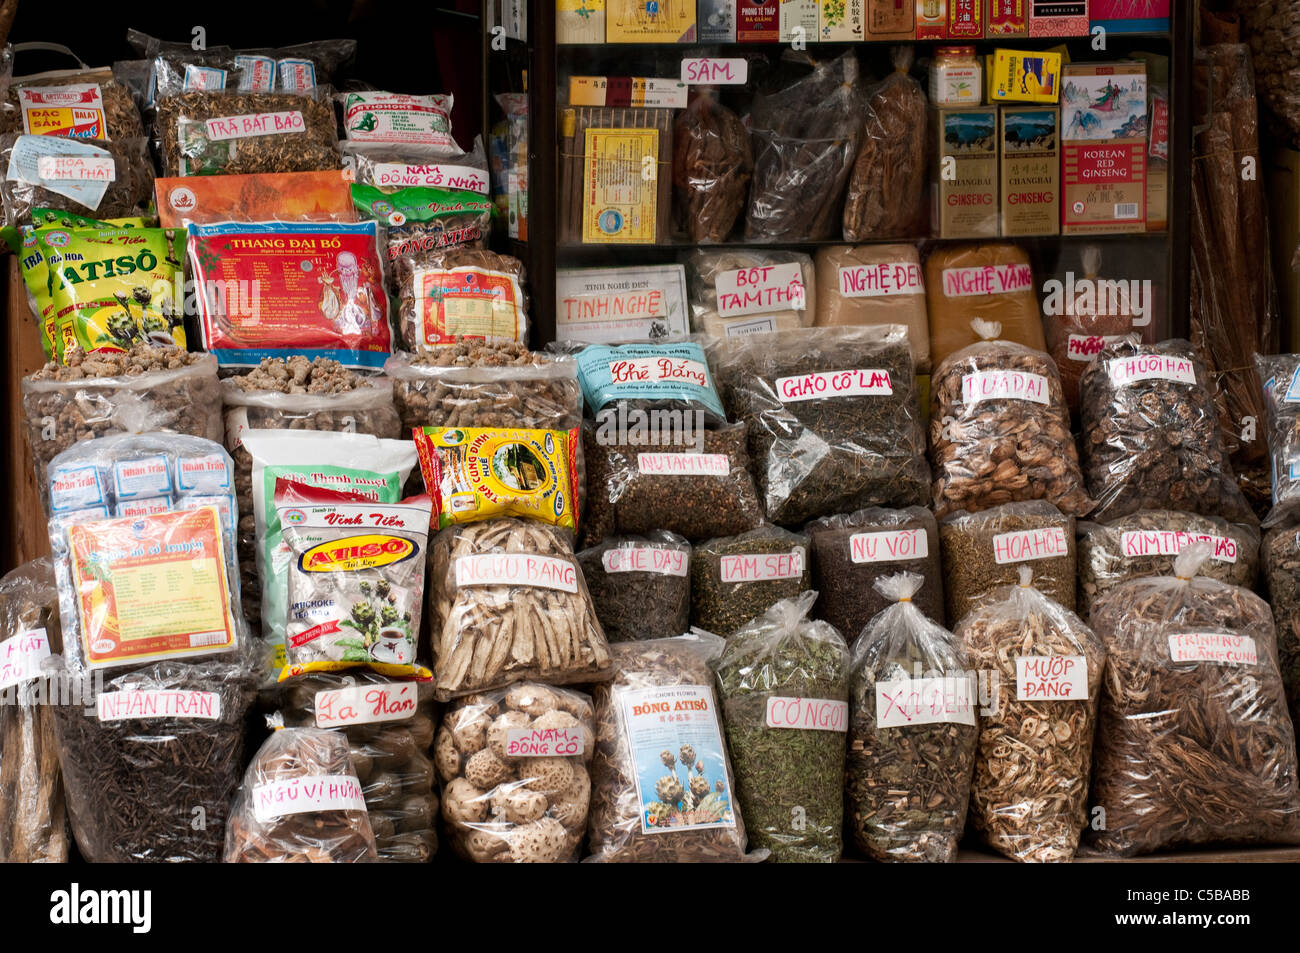 Bags and packets of medicinal herbs and teas in a shop in Lan Ong St, Hanoi Old Quarter, Vietnam Stock Photo